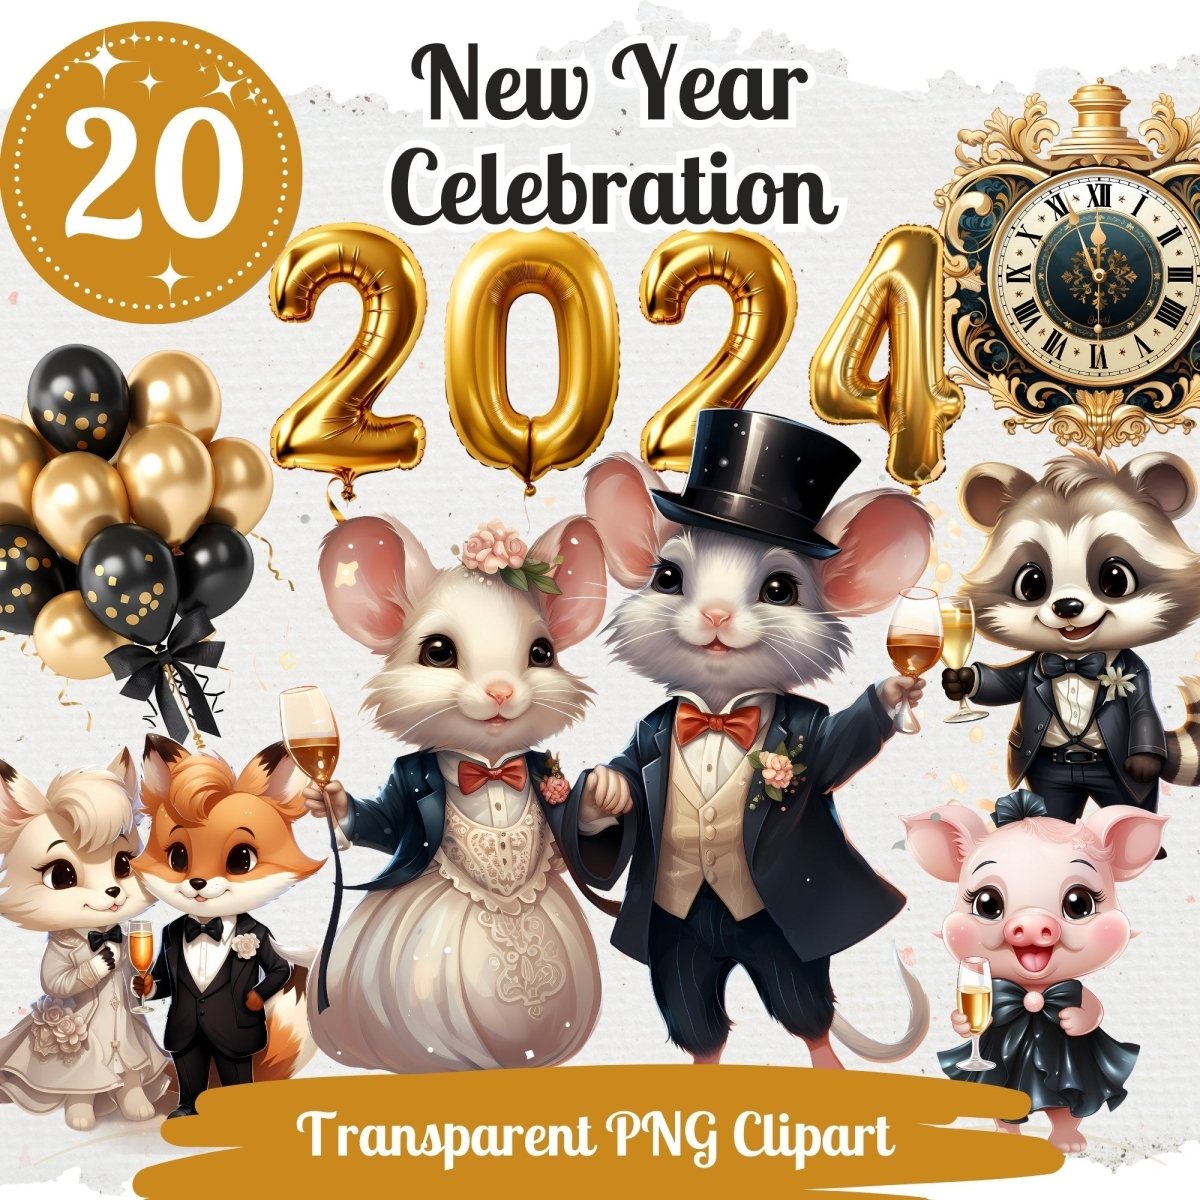 New Year Celebration Clipart 20 PNG Bundle Cute Kawaii Cartoon Animals Silvester Party Black and Gold Graphic New Year's Eve Party Design - Everything Pixel